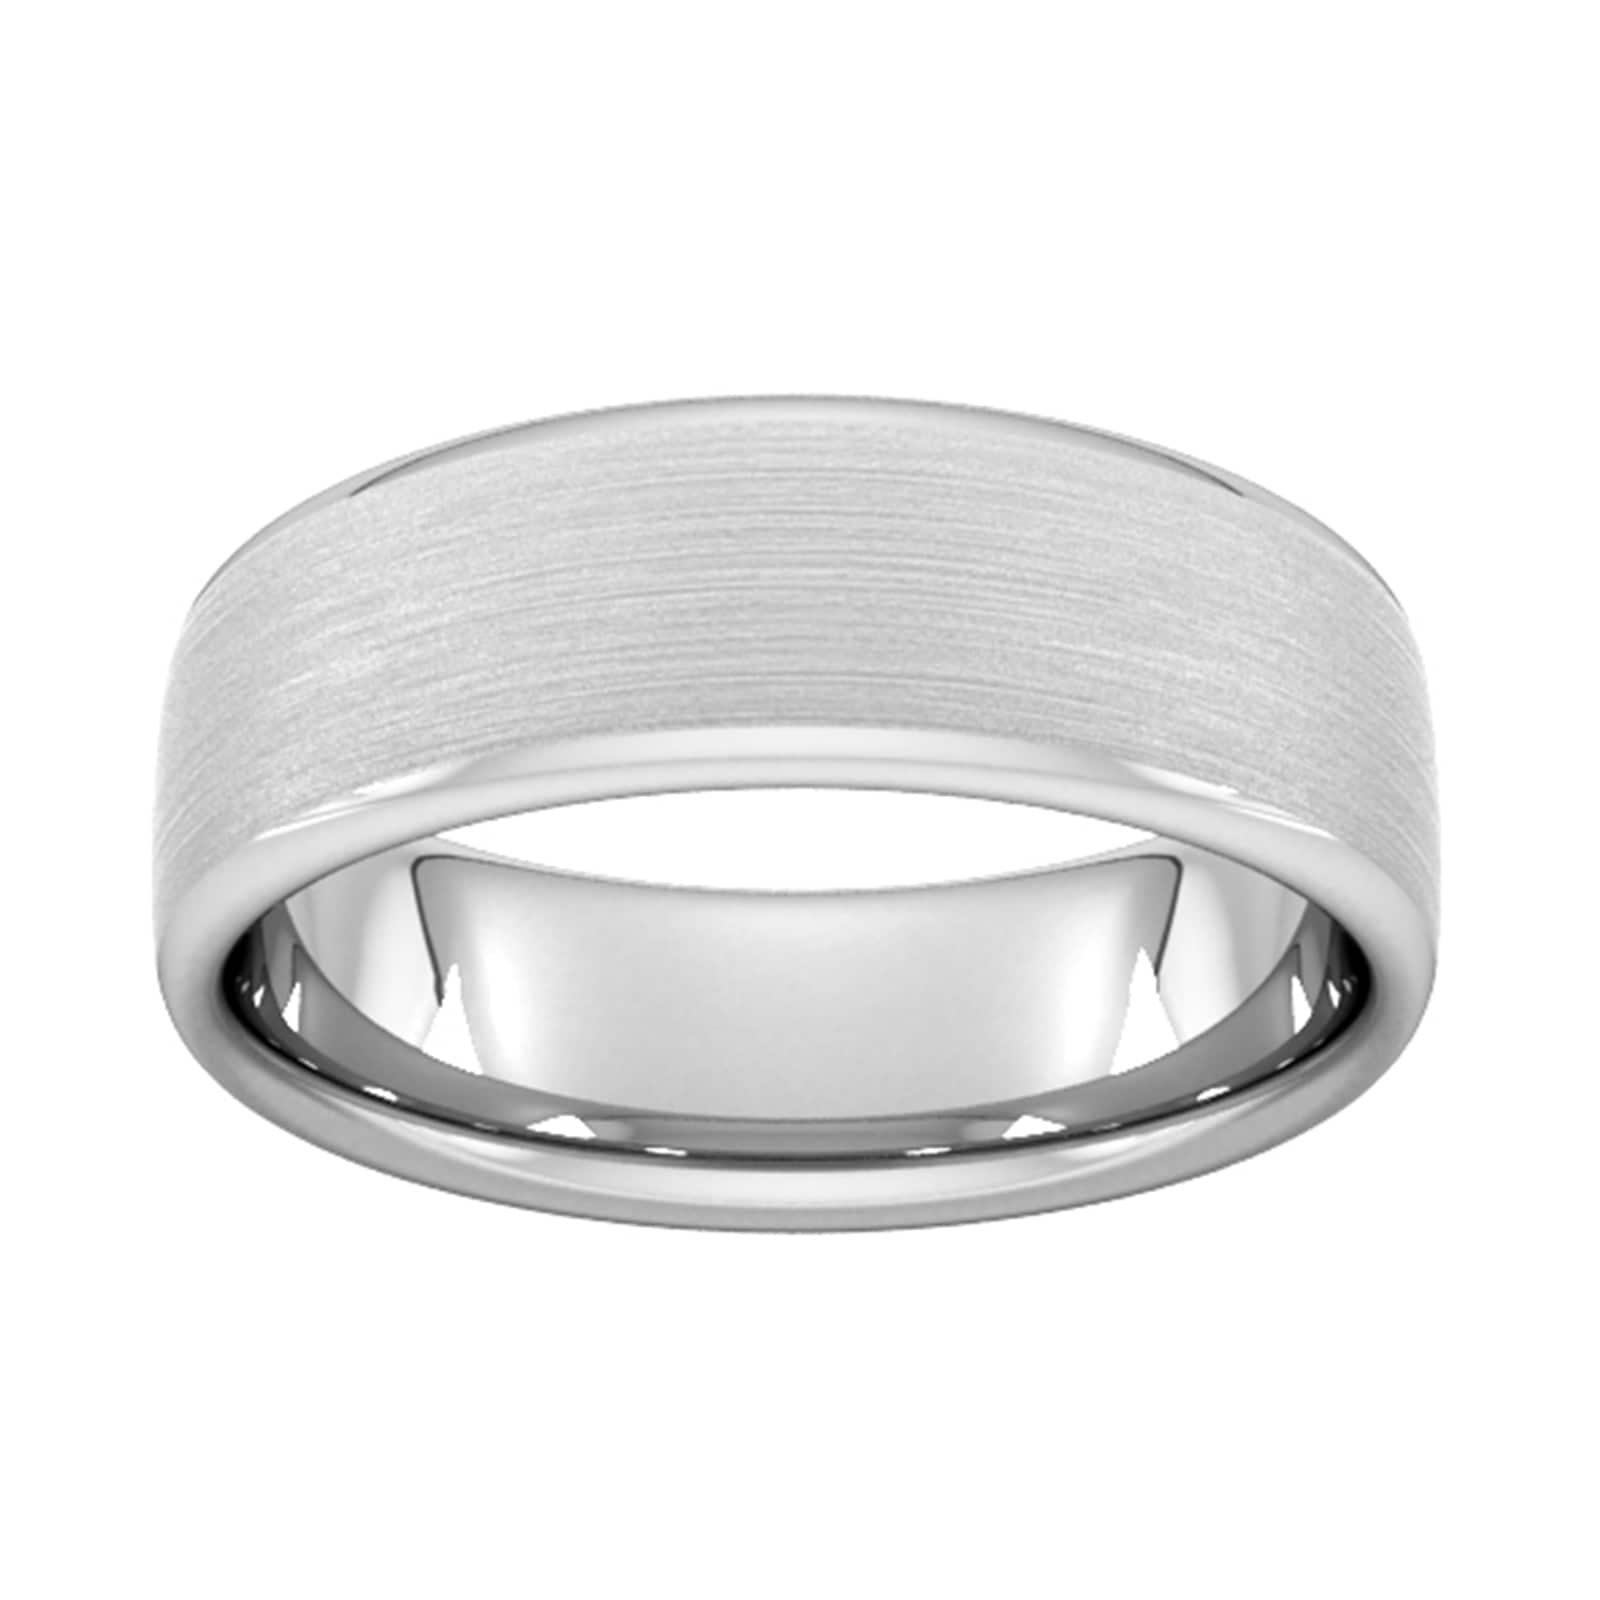 7mm D Shape Heavy Matt Finished Wedding Ring In 18 Carat White Gold - Ring Size O